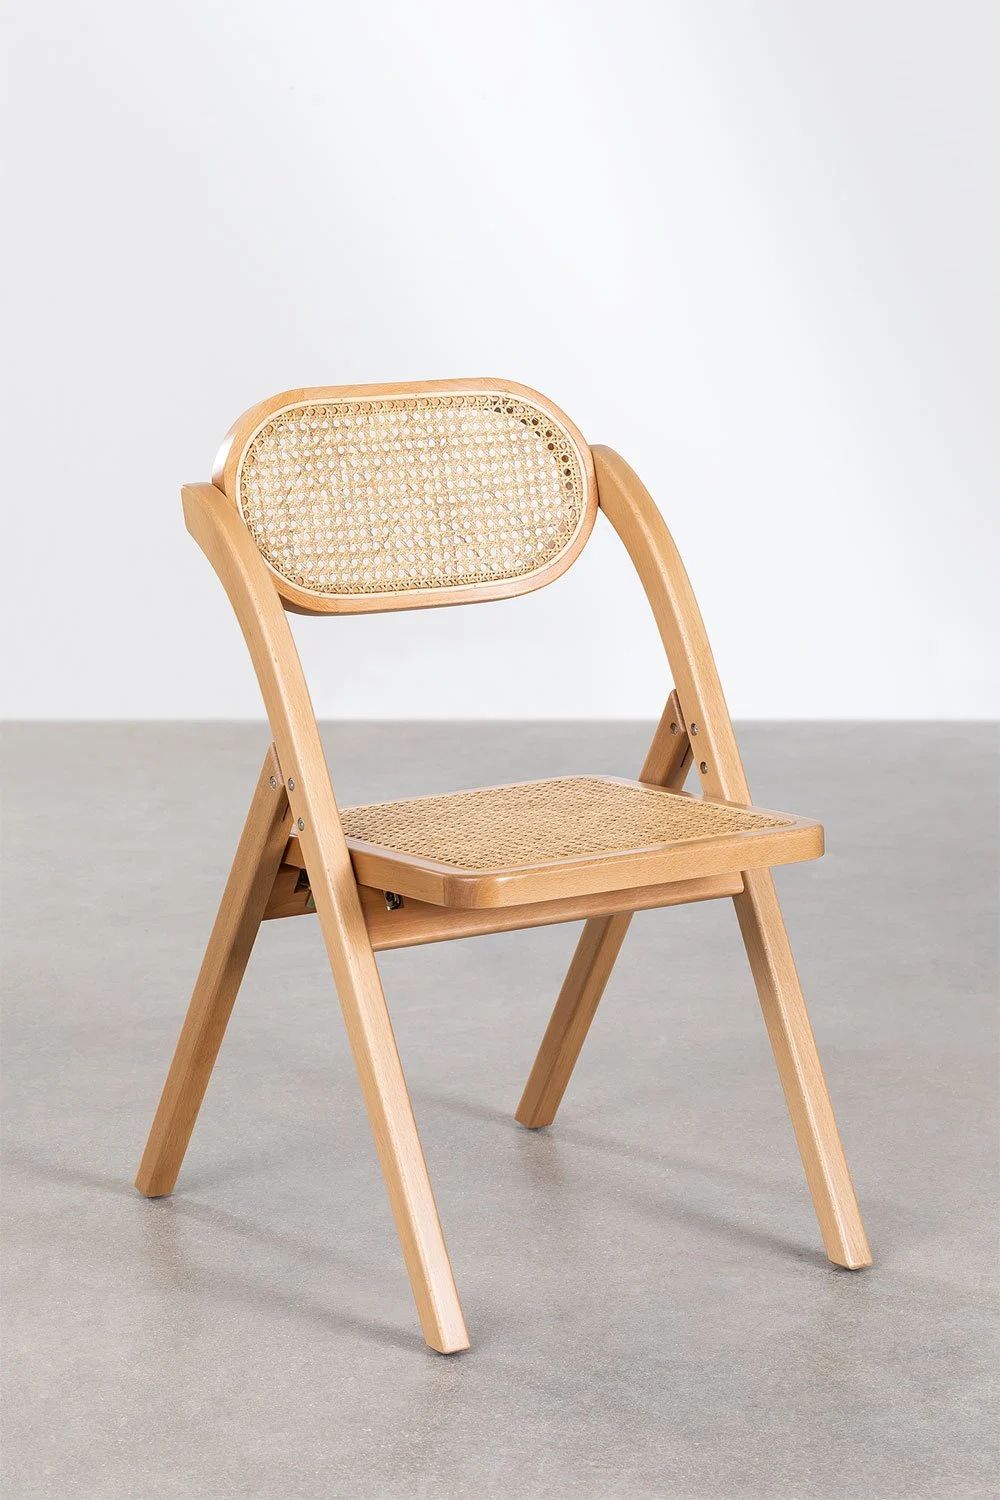 Wooden And Cane Chairs 